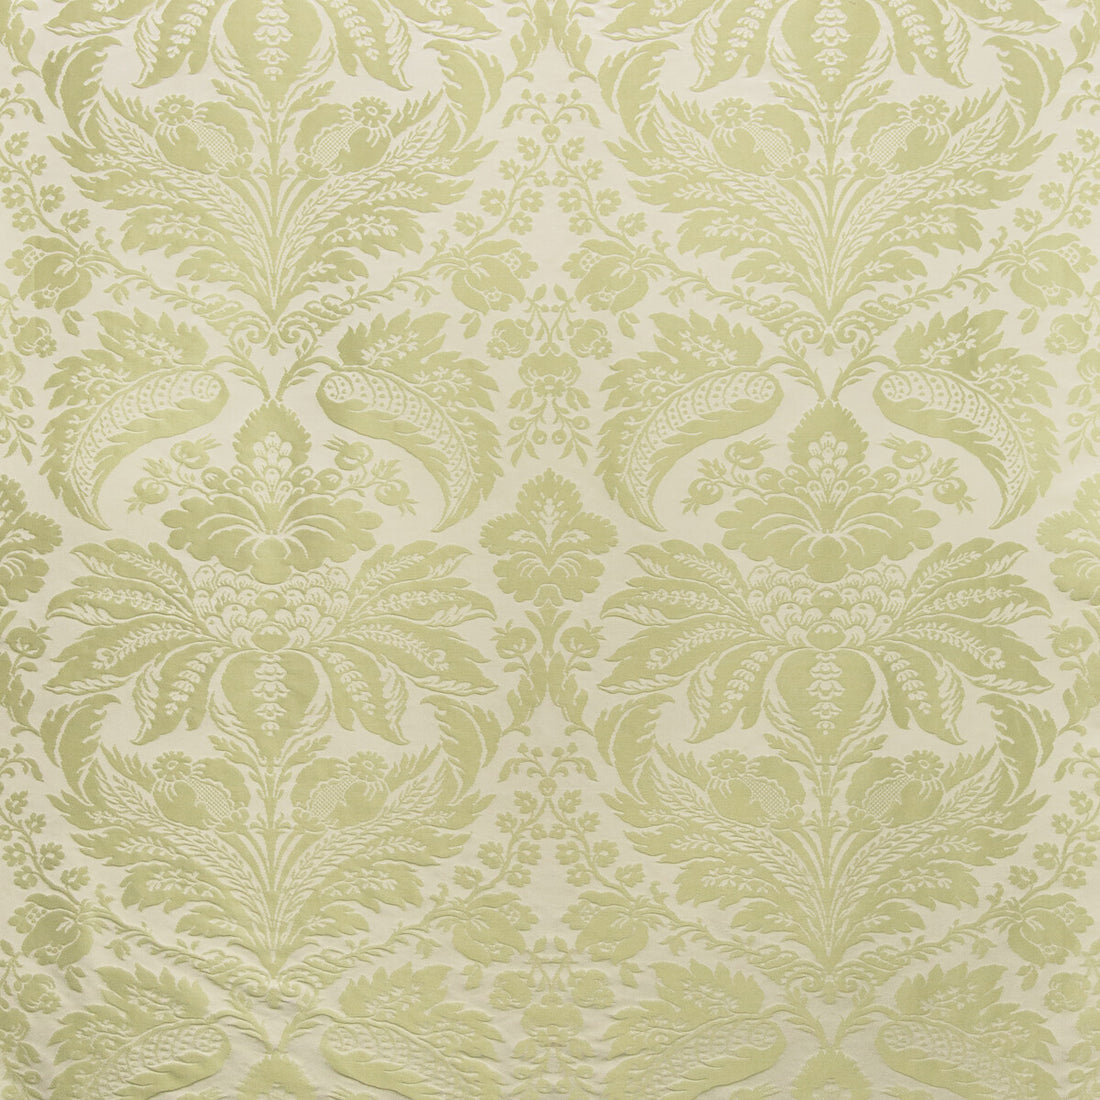 Damask Pierre fabric in lichen color - pattern 8013188.311.0 - by Brunschwig &amp; Fils in the B&amp;F Showroom Exclusive 2019 collection